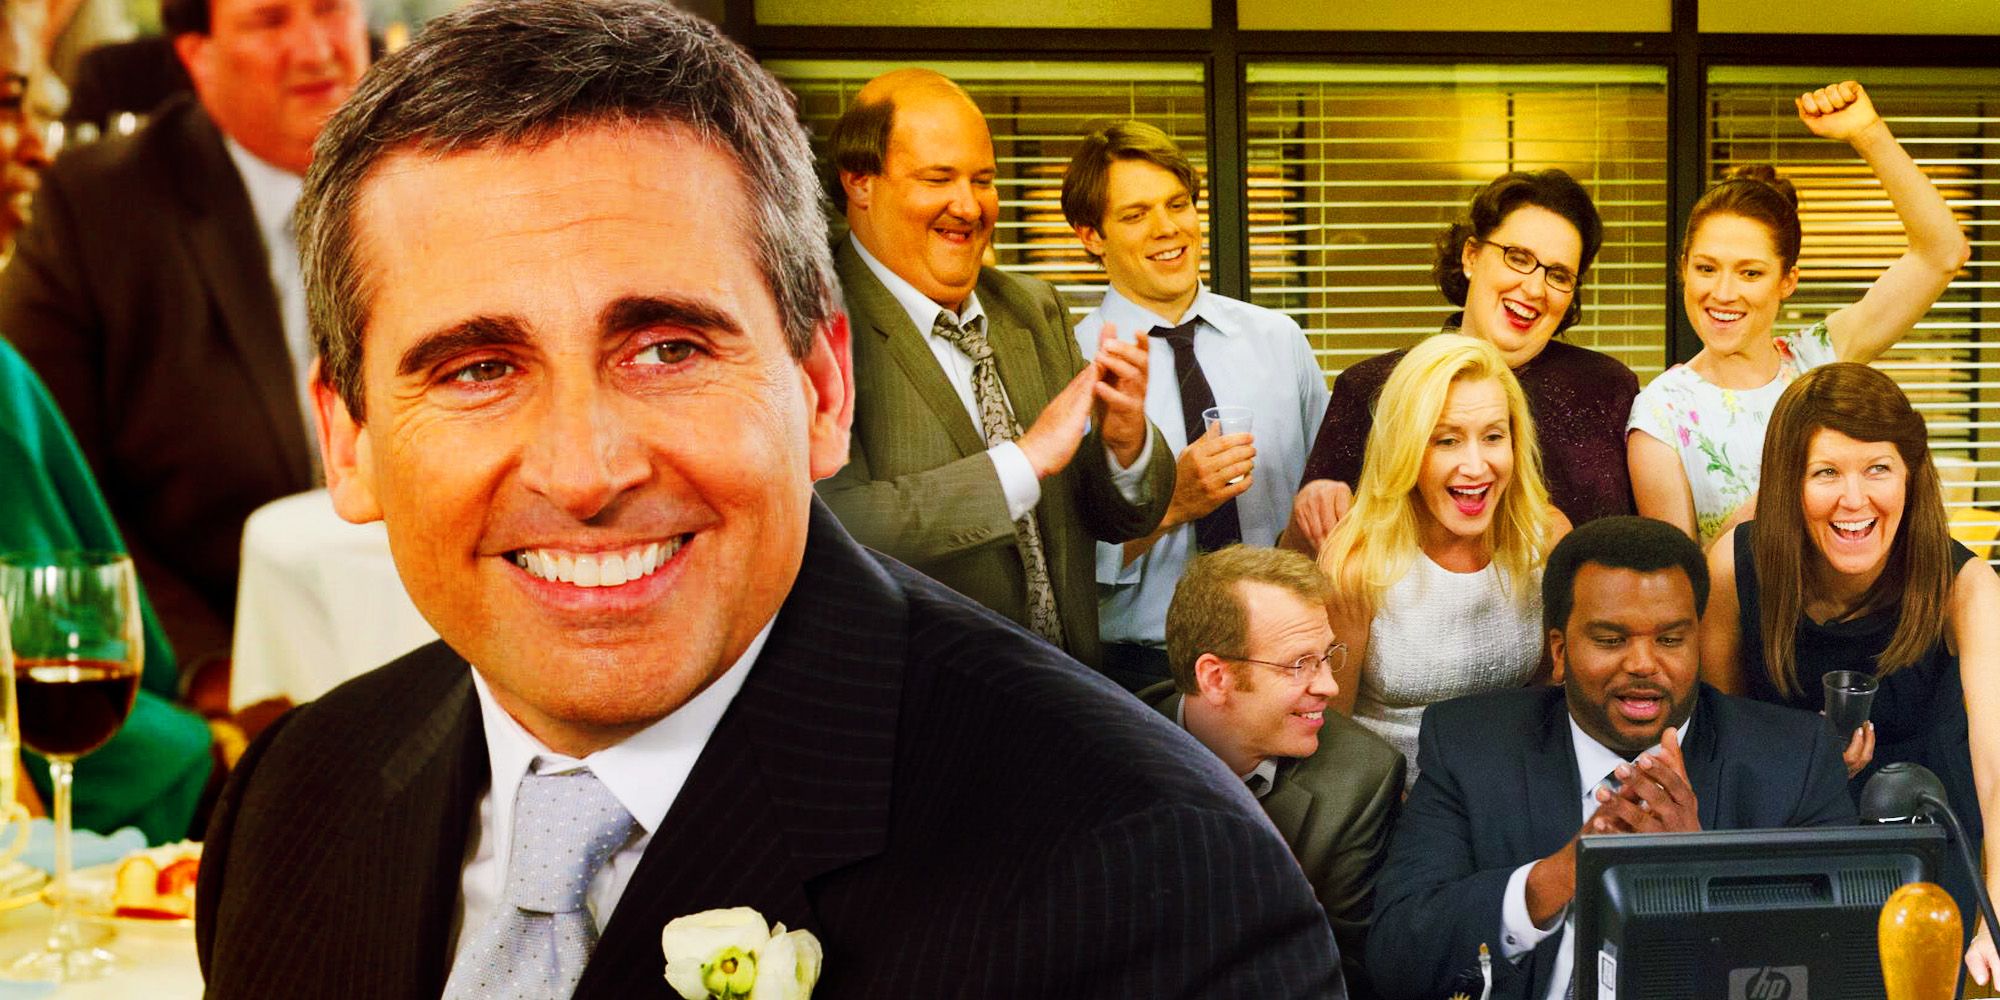 Collage of Michael Scott and Dunder Mifflin employees